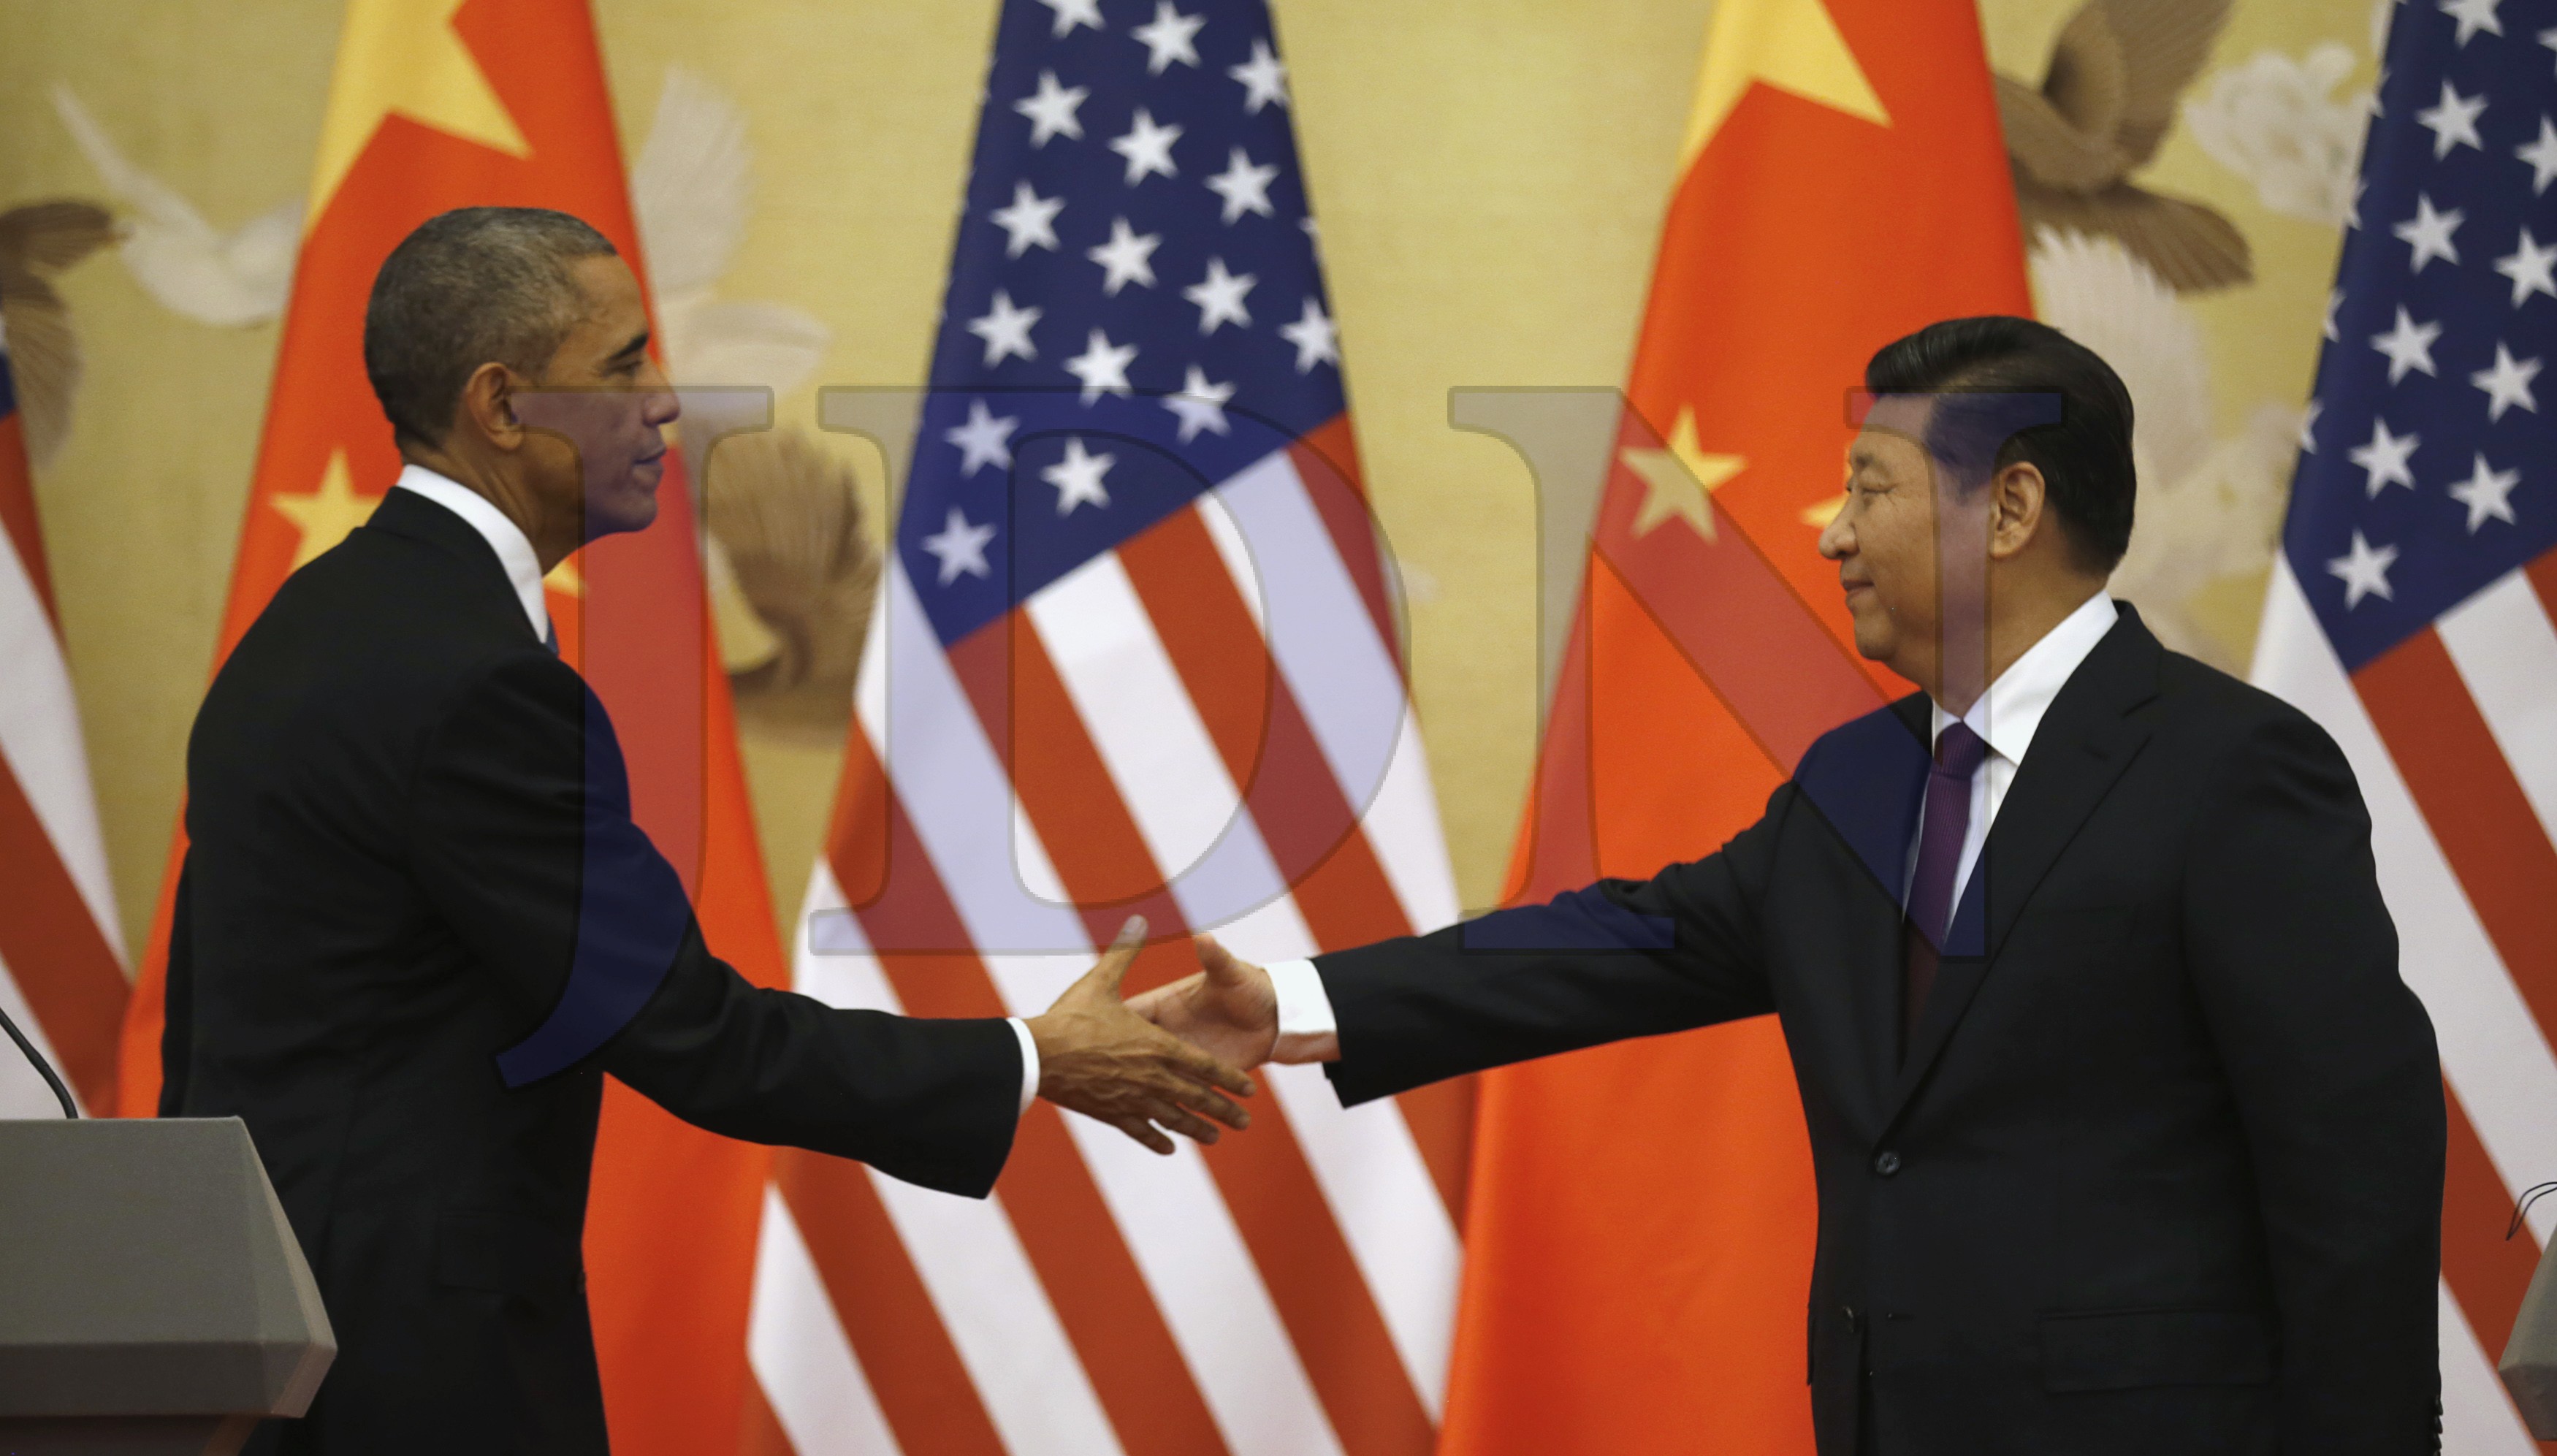 Obama and Xi shake hands at the end of their news conference in the Great Hall of the People in Beijing